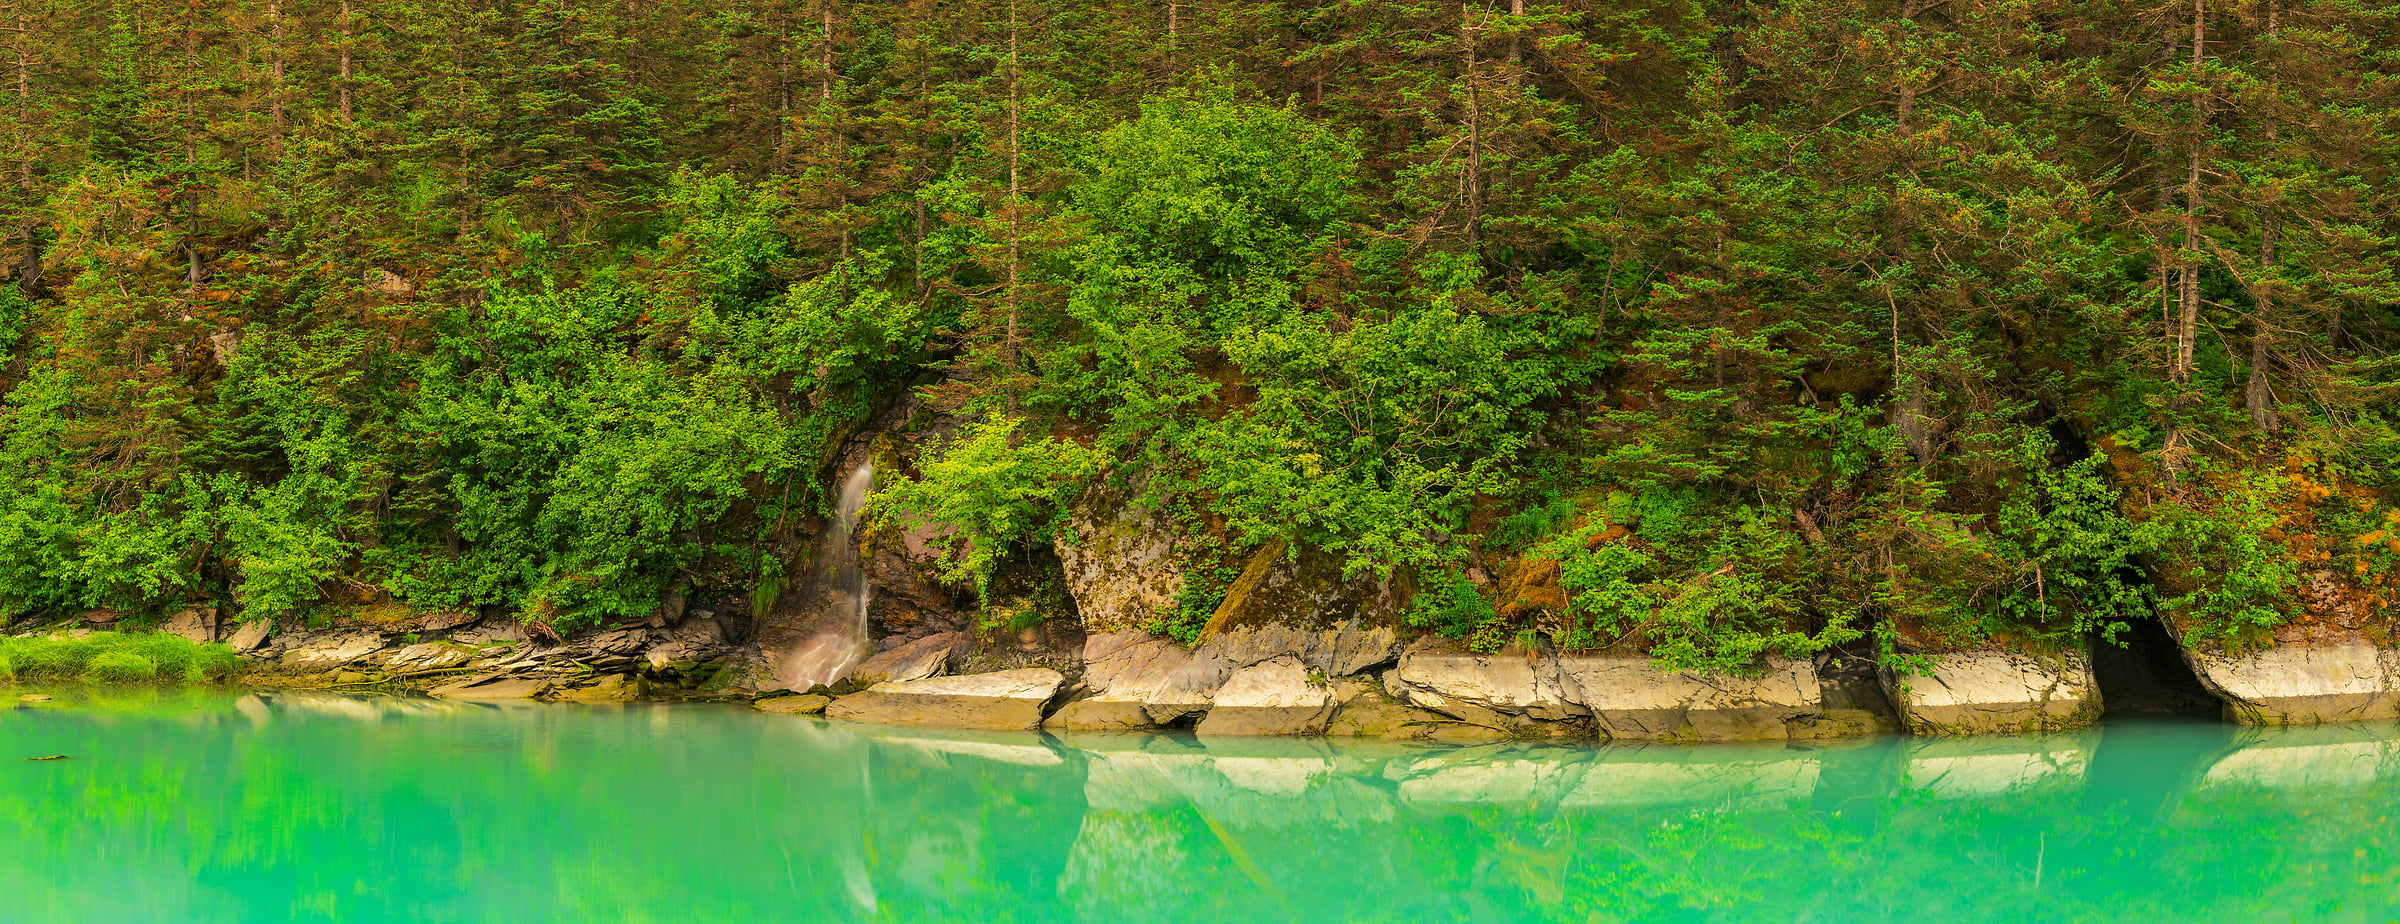 879 megapixels! A very high resolution, large-format wall mural photo print of a pond with green foliage and green water; nature photograph created by John Freeman in Port Valdez, Alaska, USA.